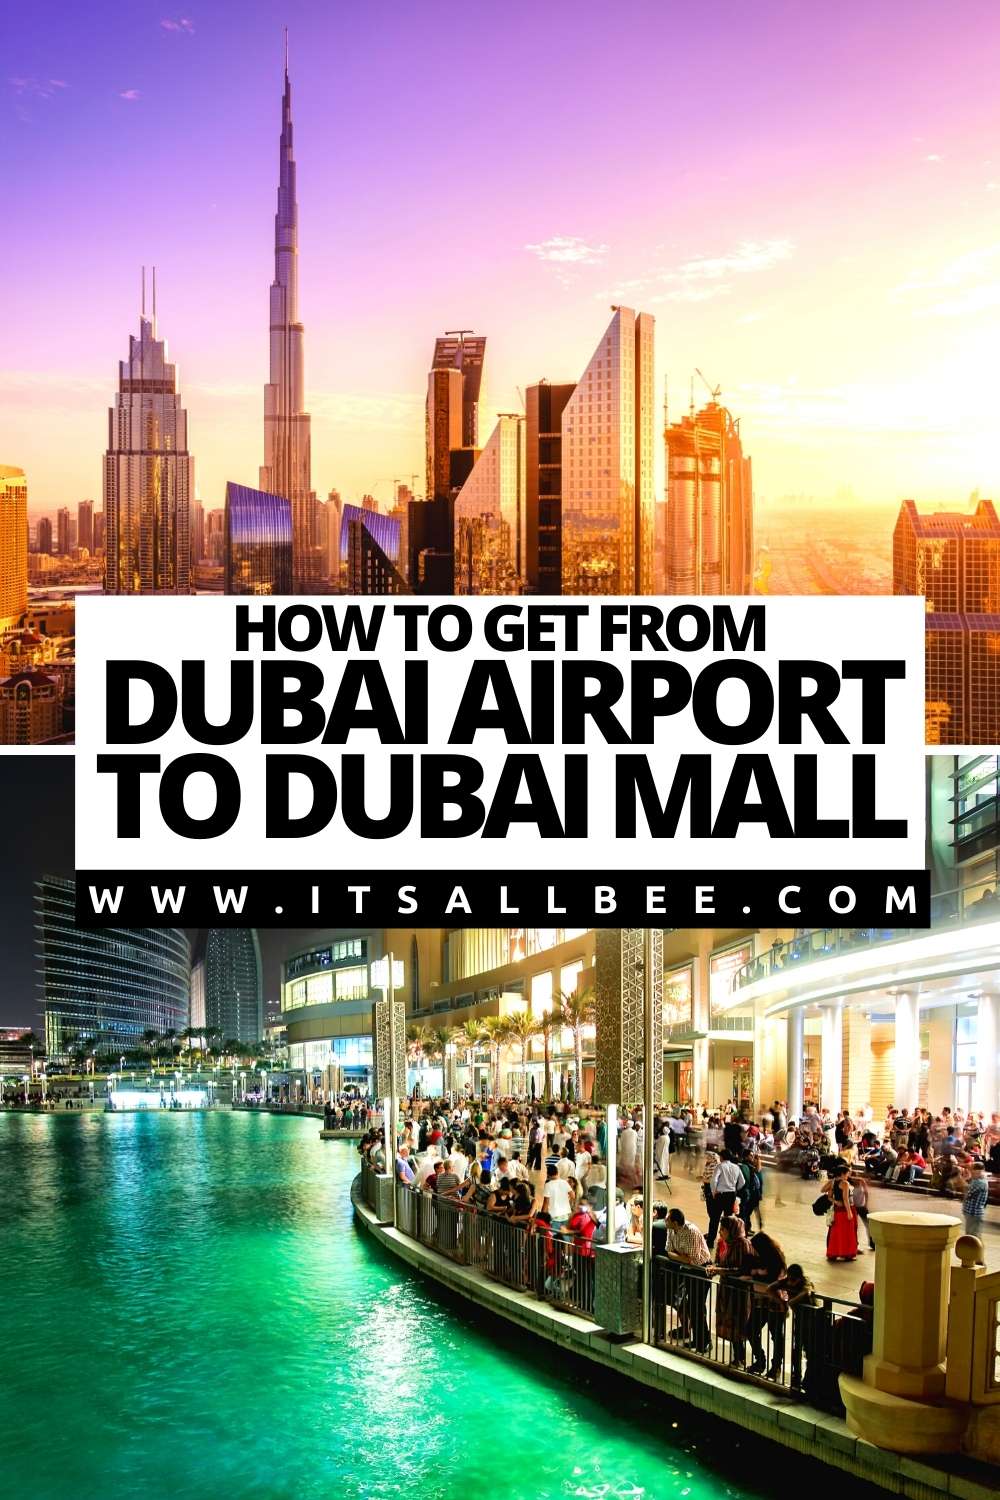 | Dubai Taxi Fare From Airport To Mall Of Emirates | Dubai Airport Shopping Mall | Dubai Airport To Dubai Mall Taxi fare | Dubai Airport To City Centre Taxi Cost | Dubai International Airport To Dubai Mall | Nearest Shopping Mall To Dubai Airport | 